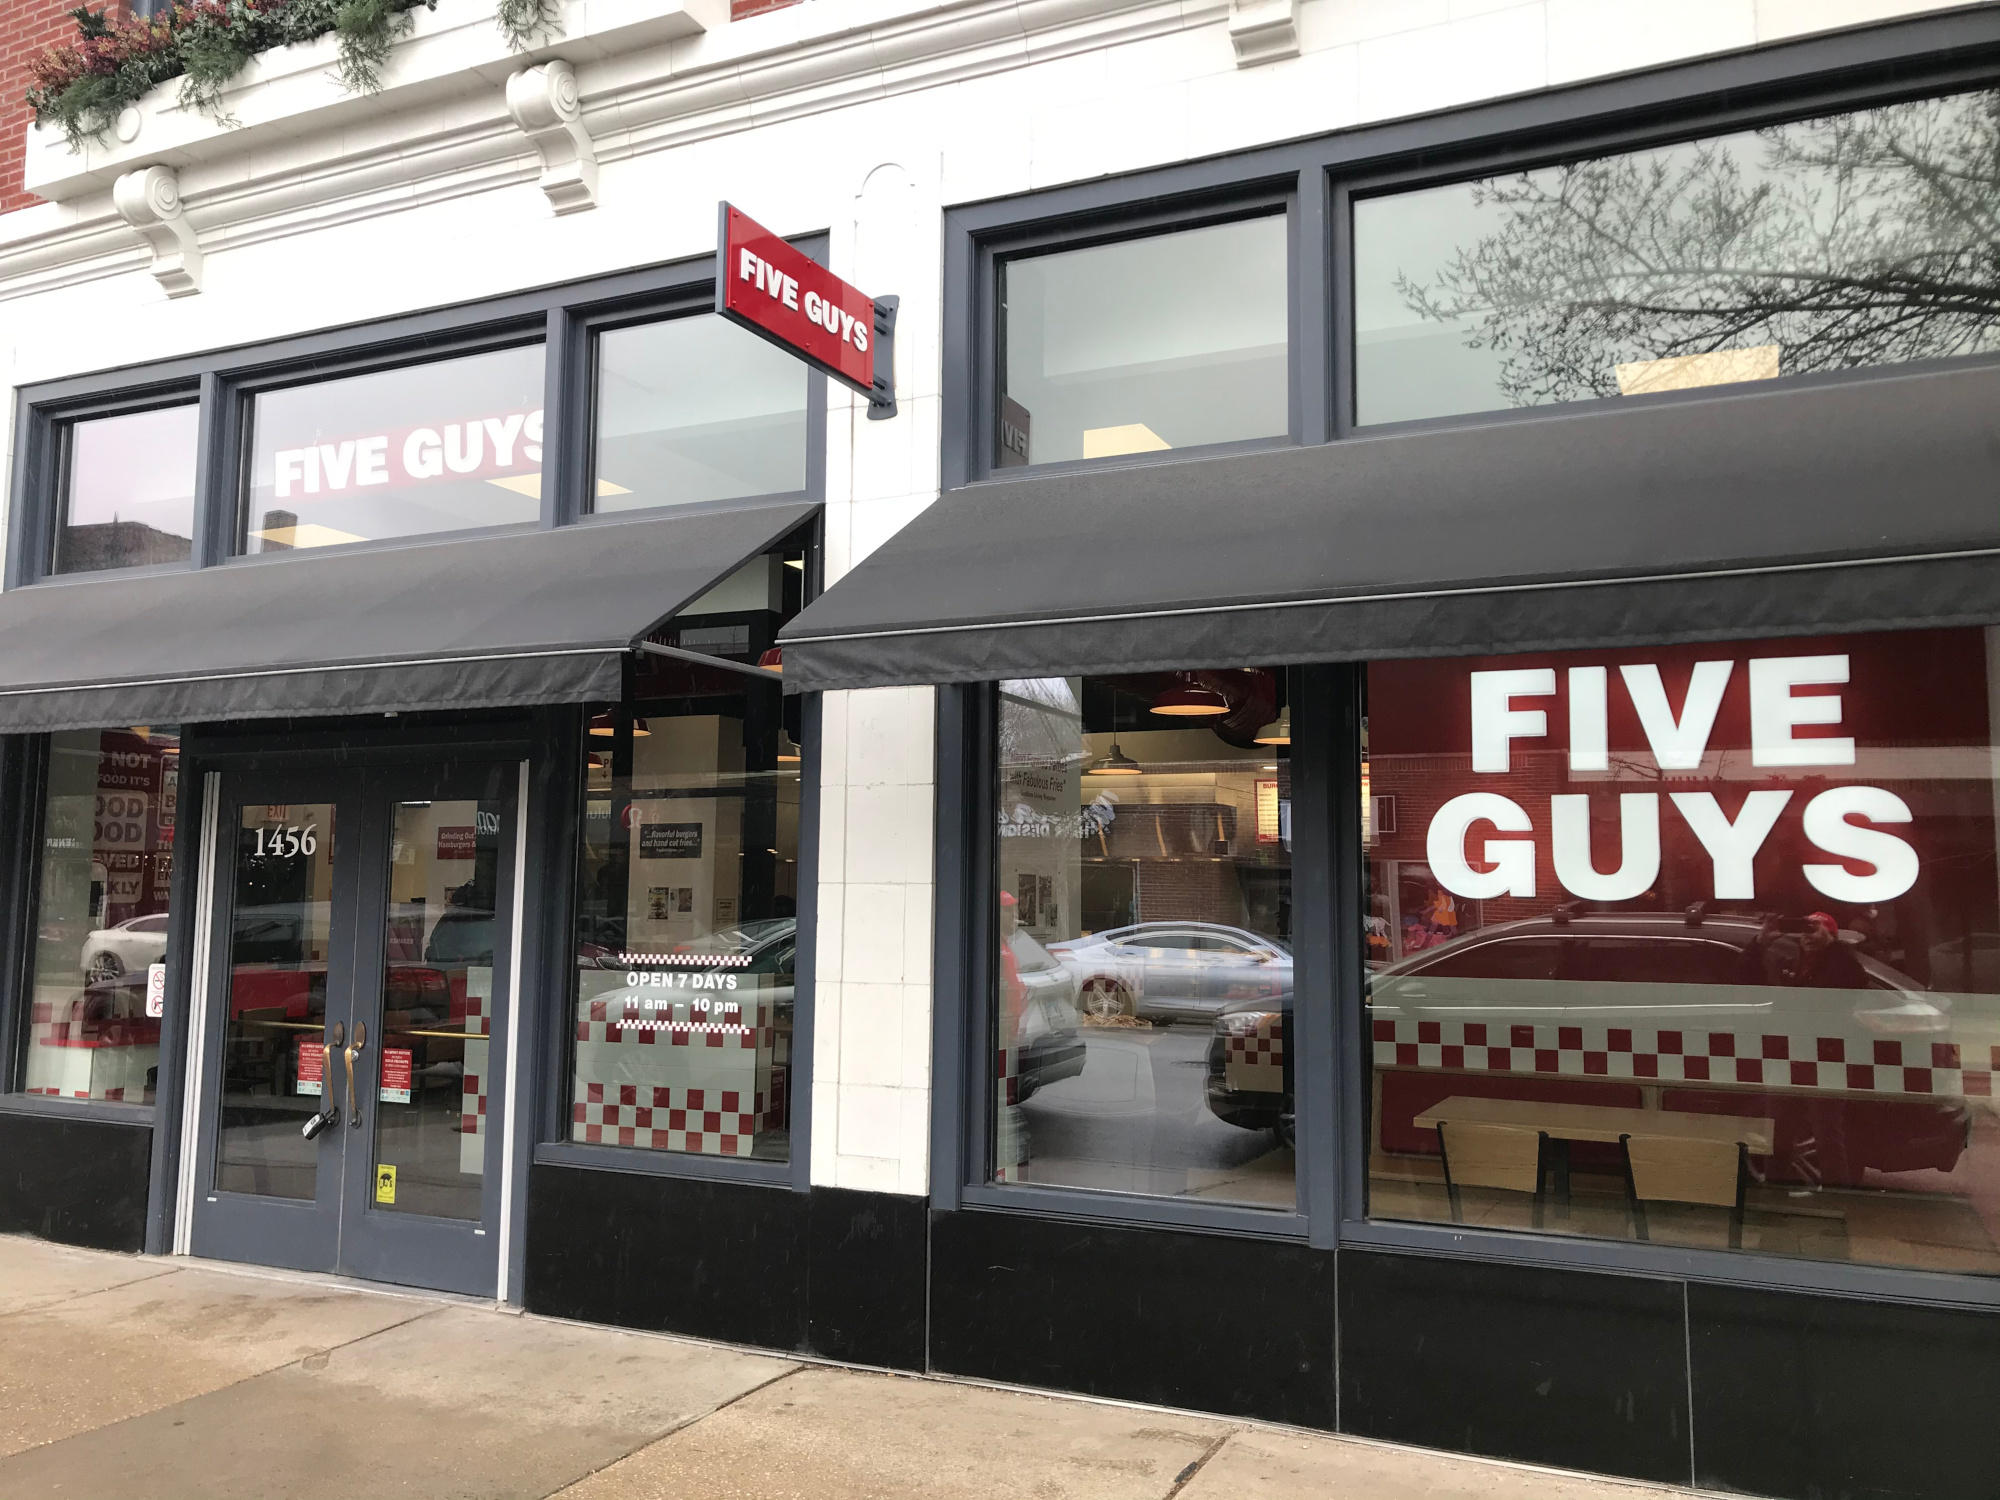 Five Guys at 1456 E 53rd St. in Chicago, Illinois